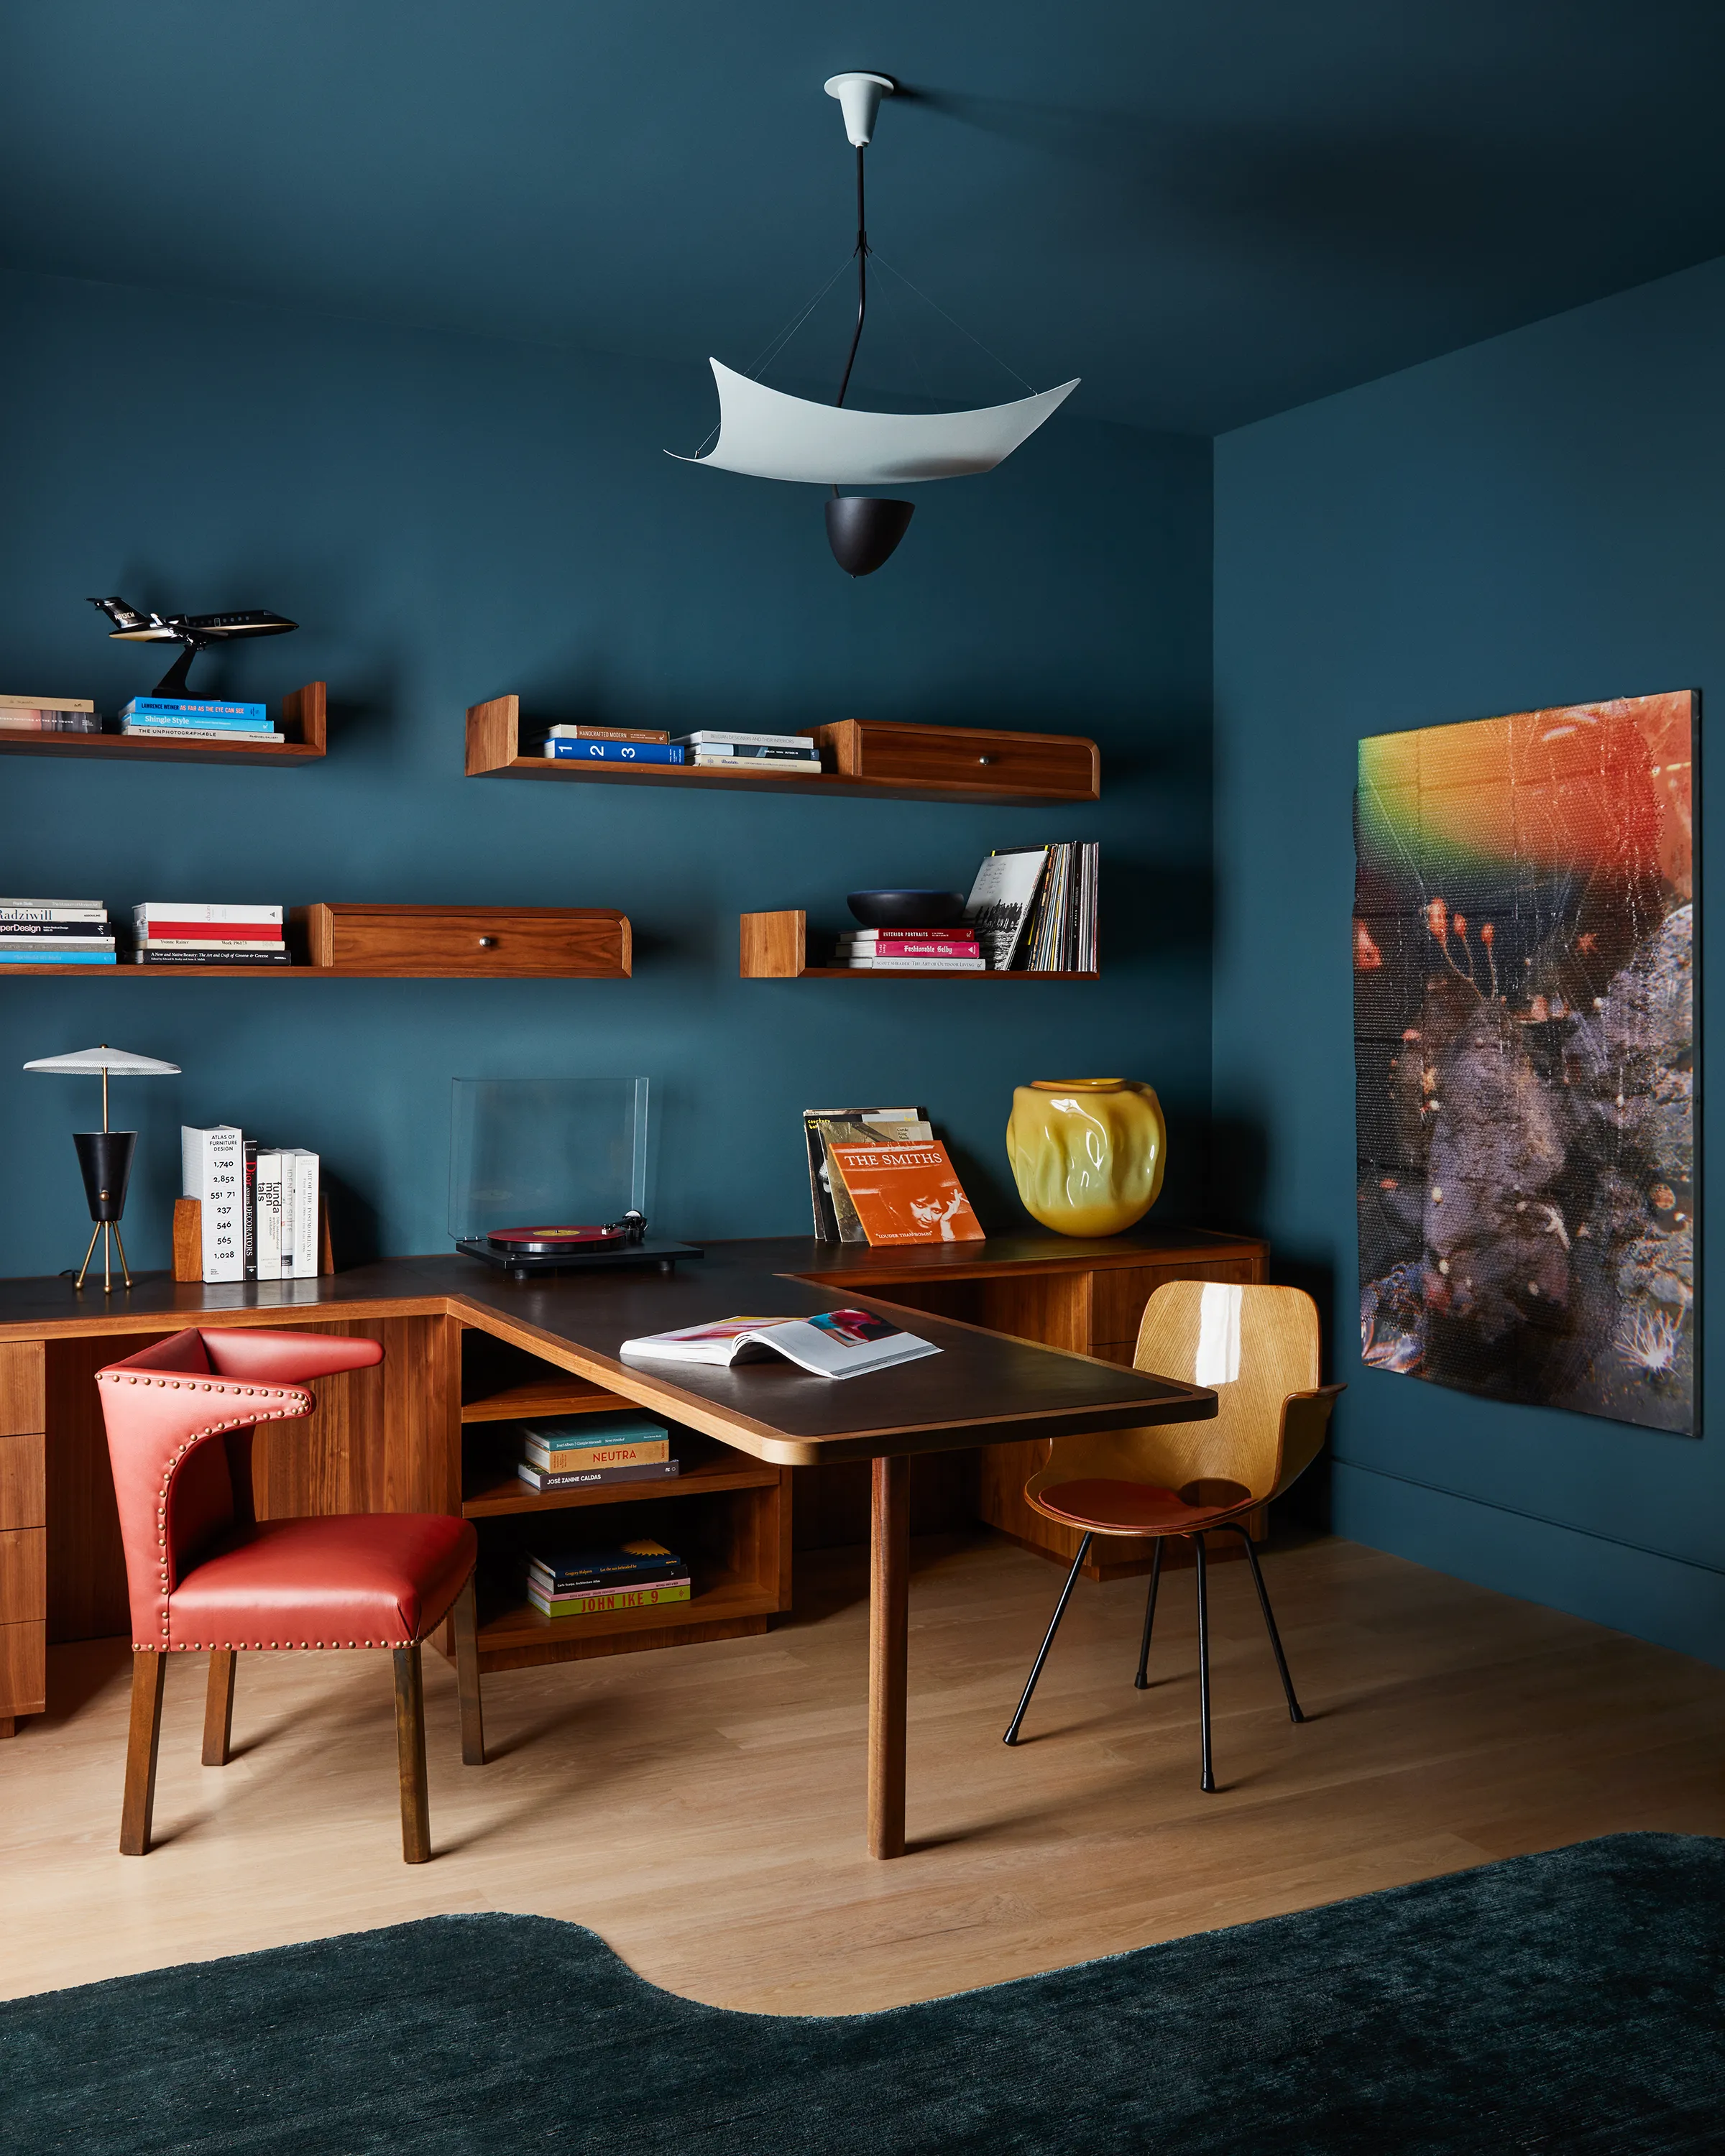 A vintage Model 12385 Vela Ceiling Light by Angelo Lelli suspends above a Medea Armchair by Vittorio Nobili and vintage Frits Henningsen lounge chair in league with a custom Chroma desk tipped in Ashbury leather and Hugh Scott-Douglas’s “Natural History.”